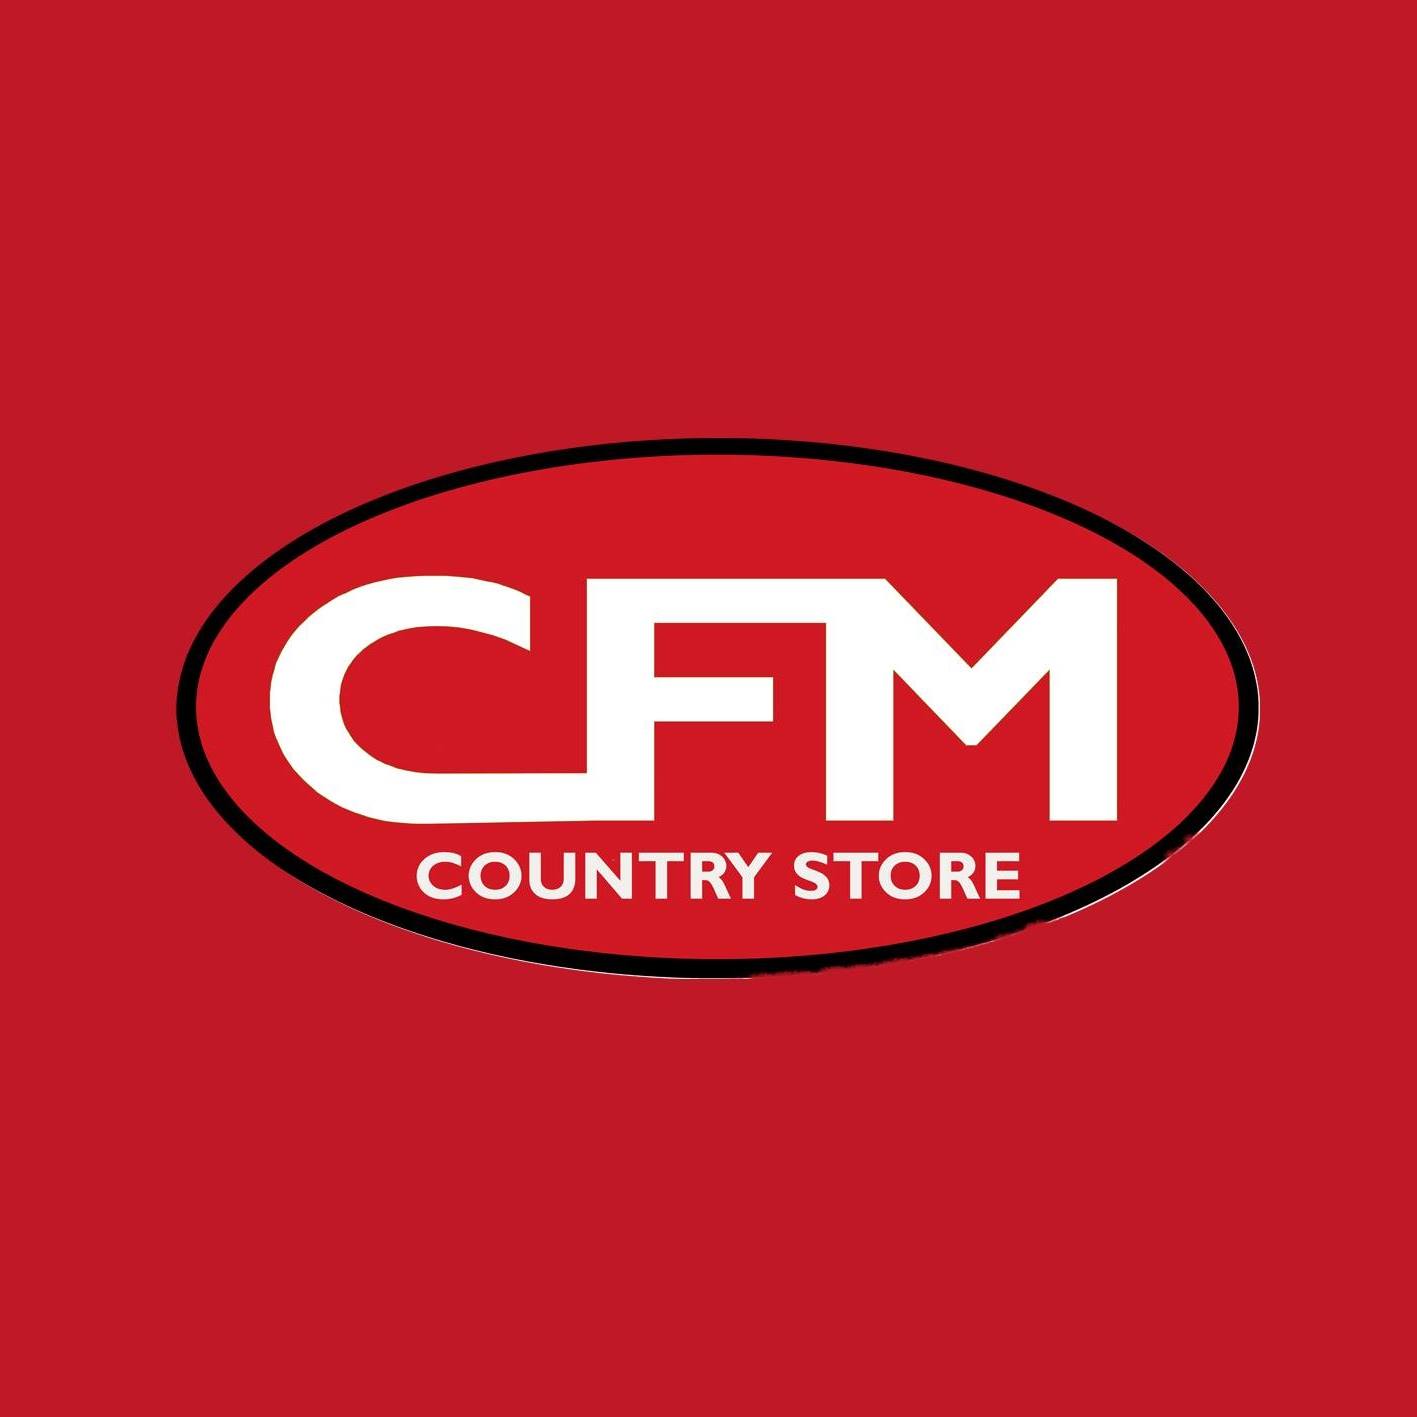 CFM Country Store Logo